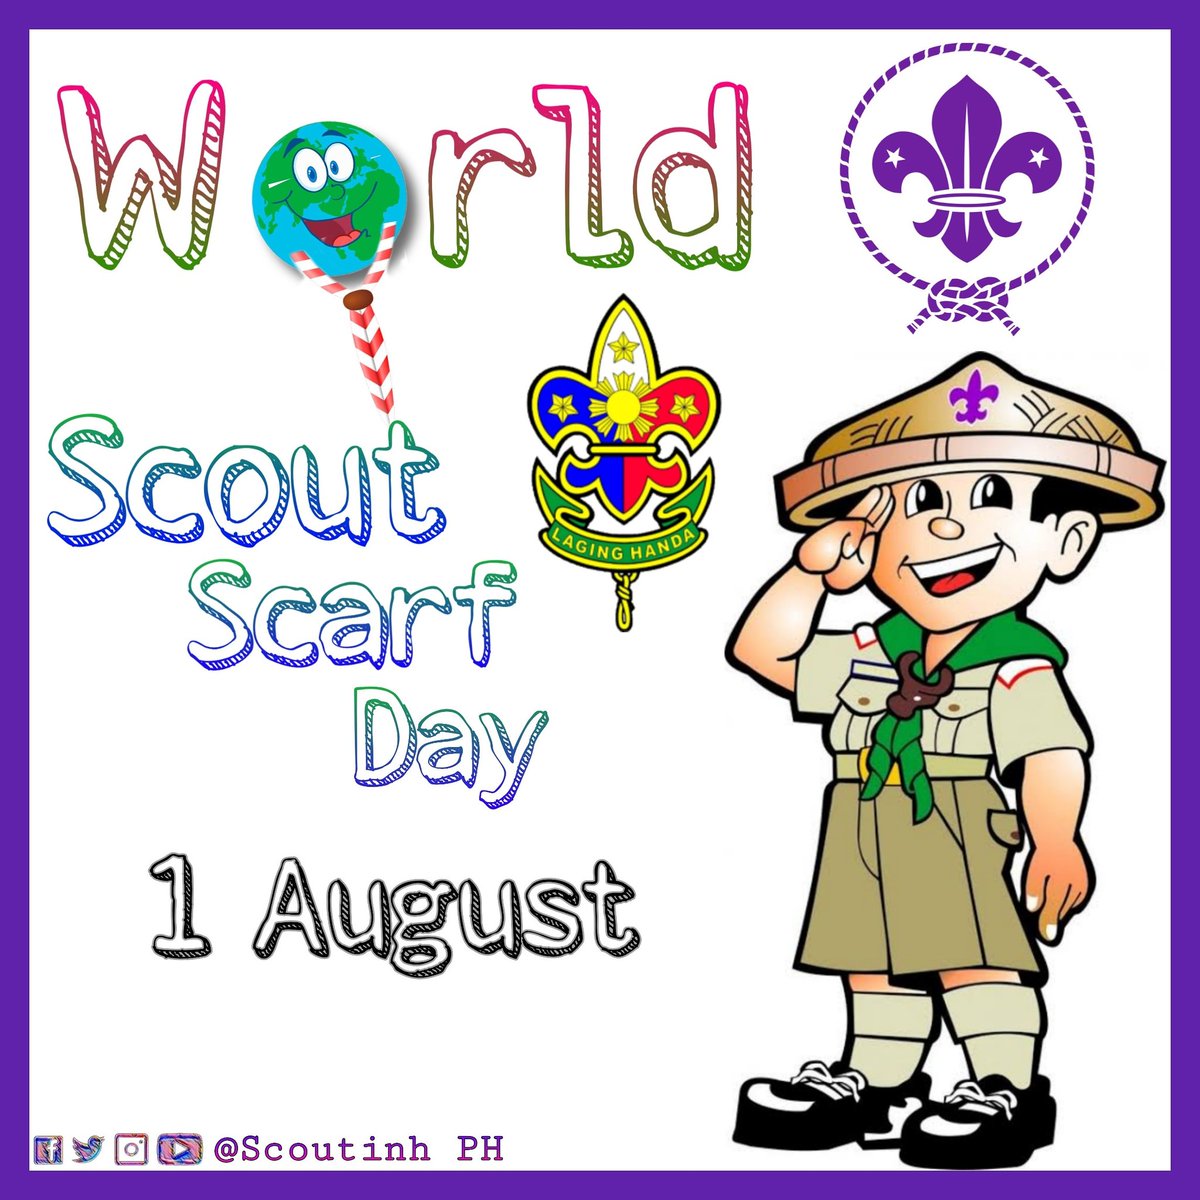 The idea of 'Scout Scarf Day' on August 1 is that all active and former scouts are requested to wear their scout scarfs in public to make the 'Spirit of Scouting' visible: Once a Scout - Always a Scout! 

#ScoutScarfDay #ScoutsPH #ScoutingPH

Scoutscarf.com